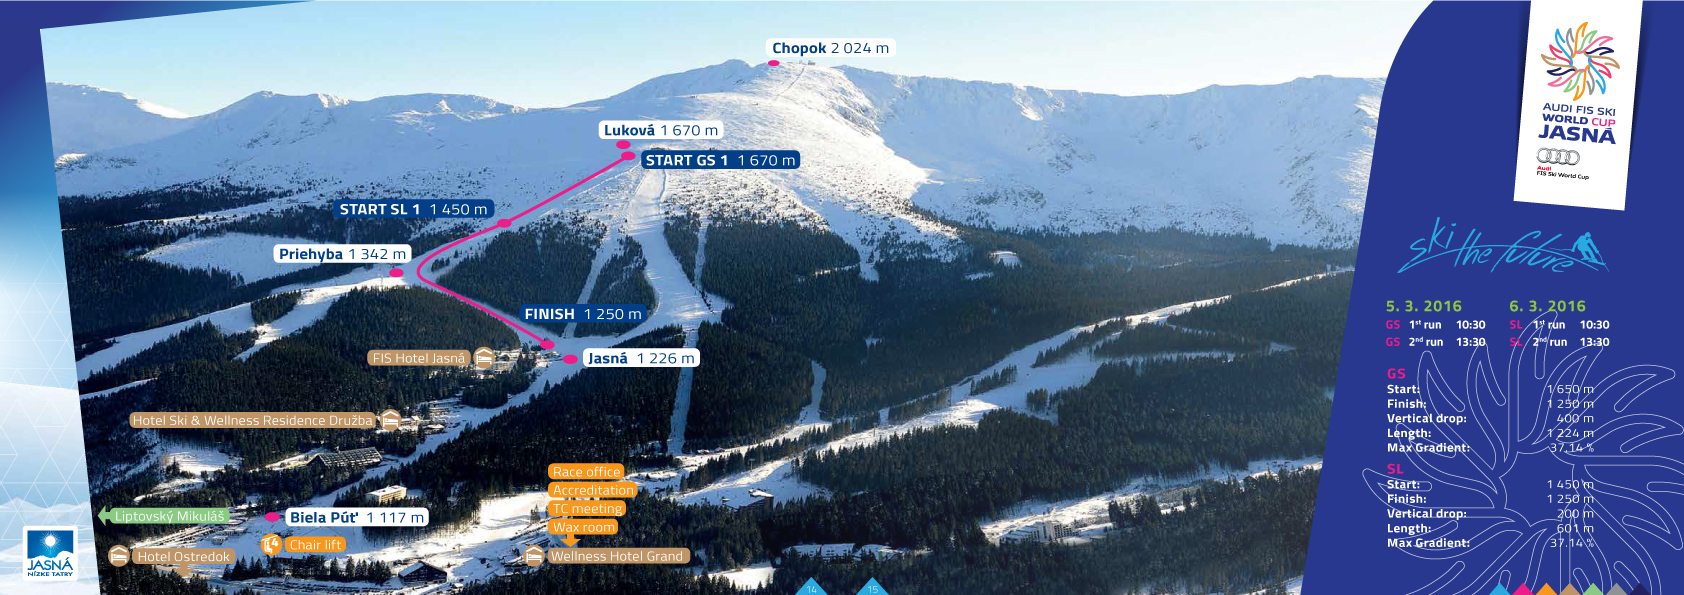 MAP WORLD CUP JASNA